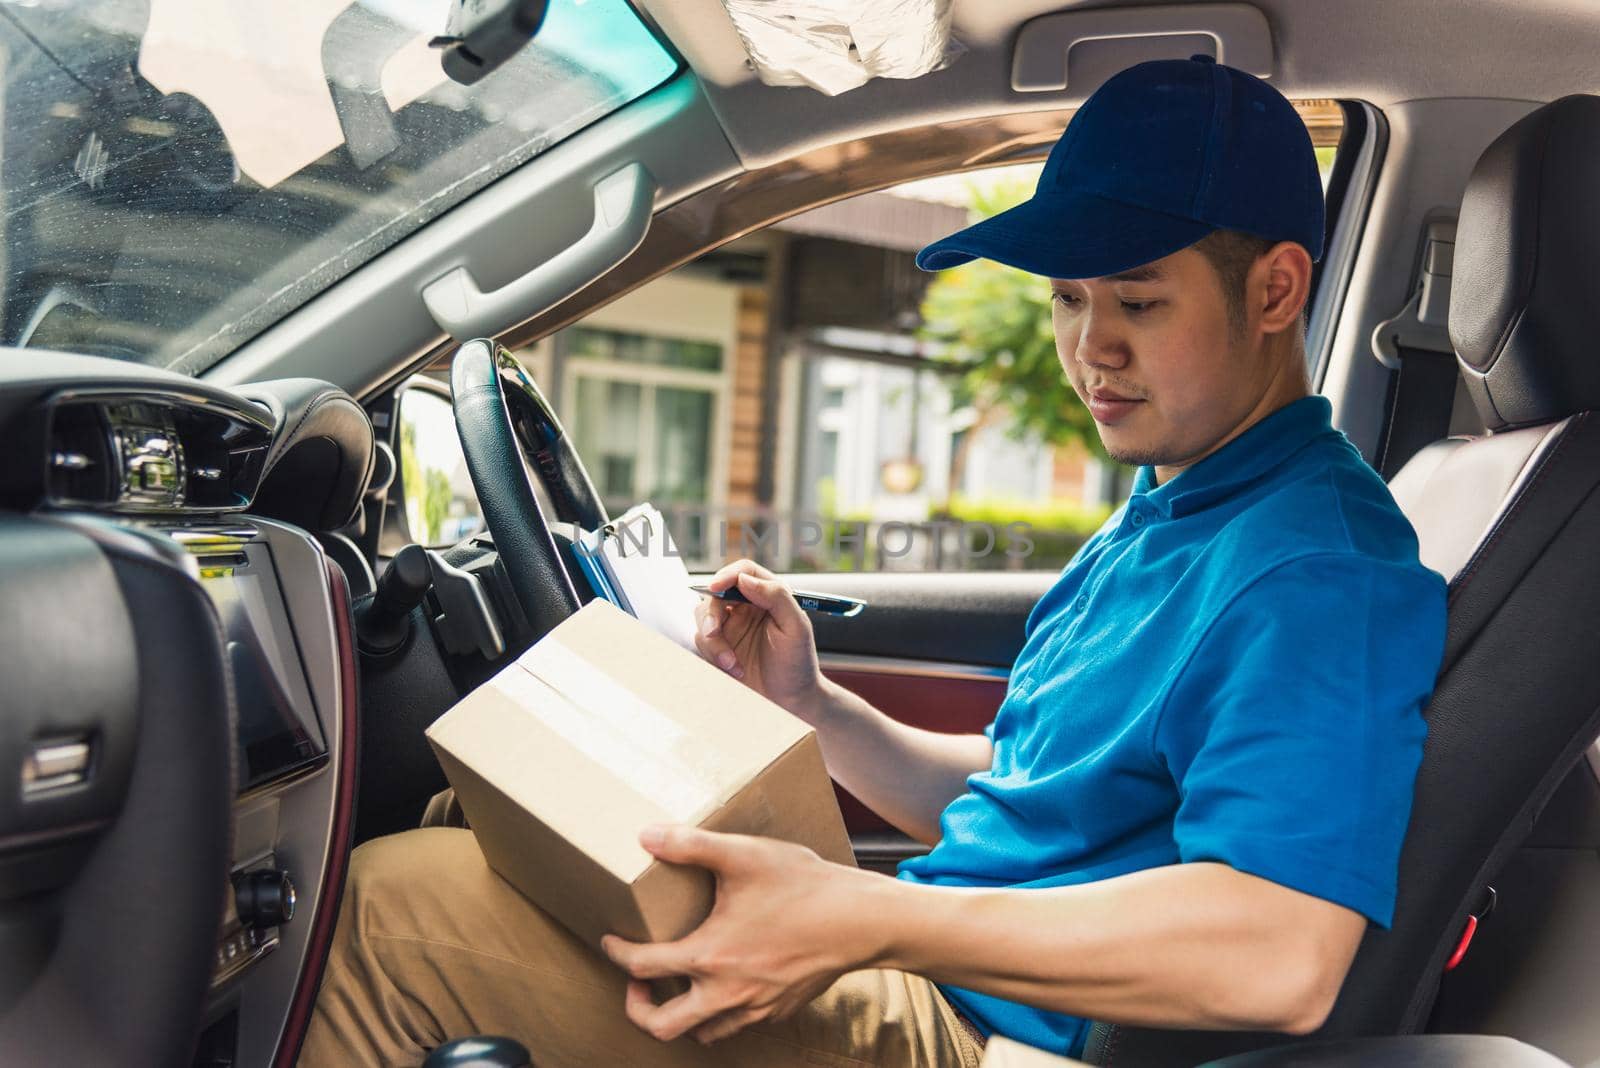 Asian young delivery man courier in uniform hold documents clipboard checking list parcel post boxes inside a car for service shipment to customer, Online shopping service concepts